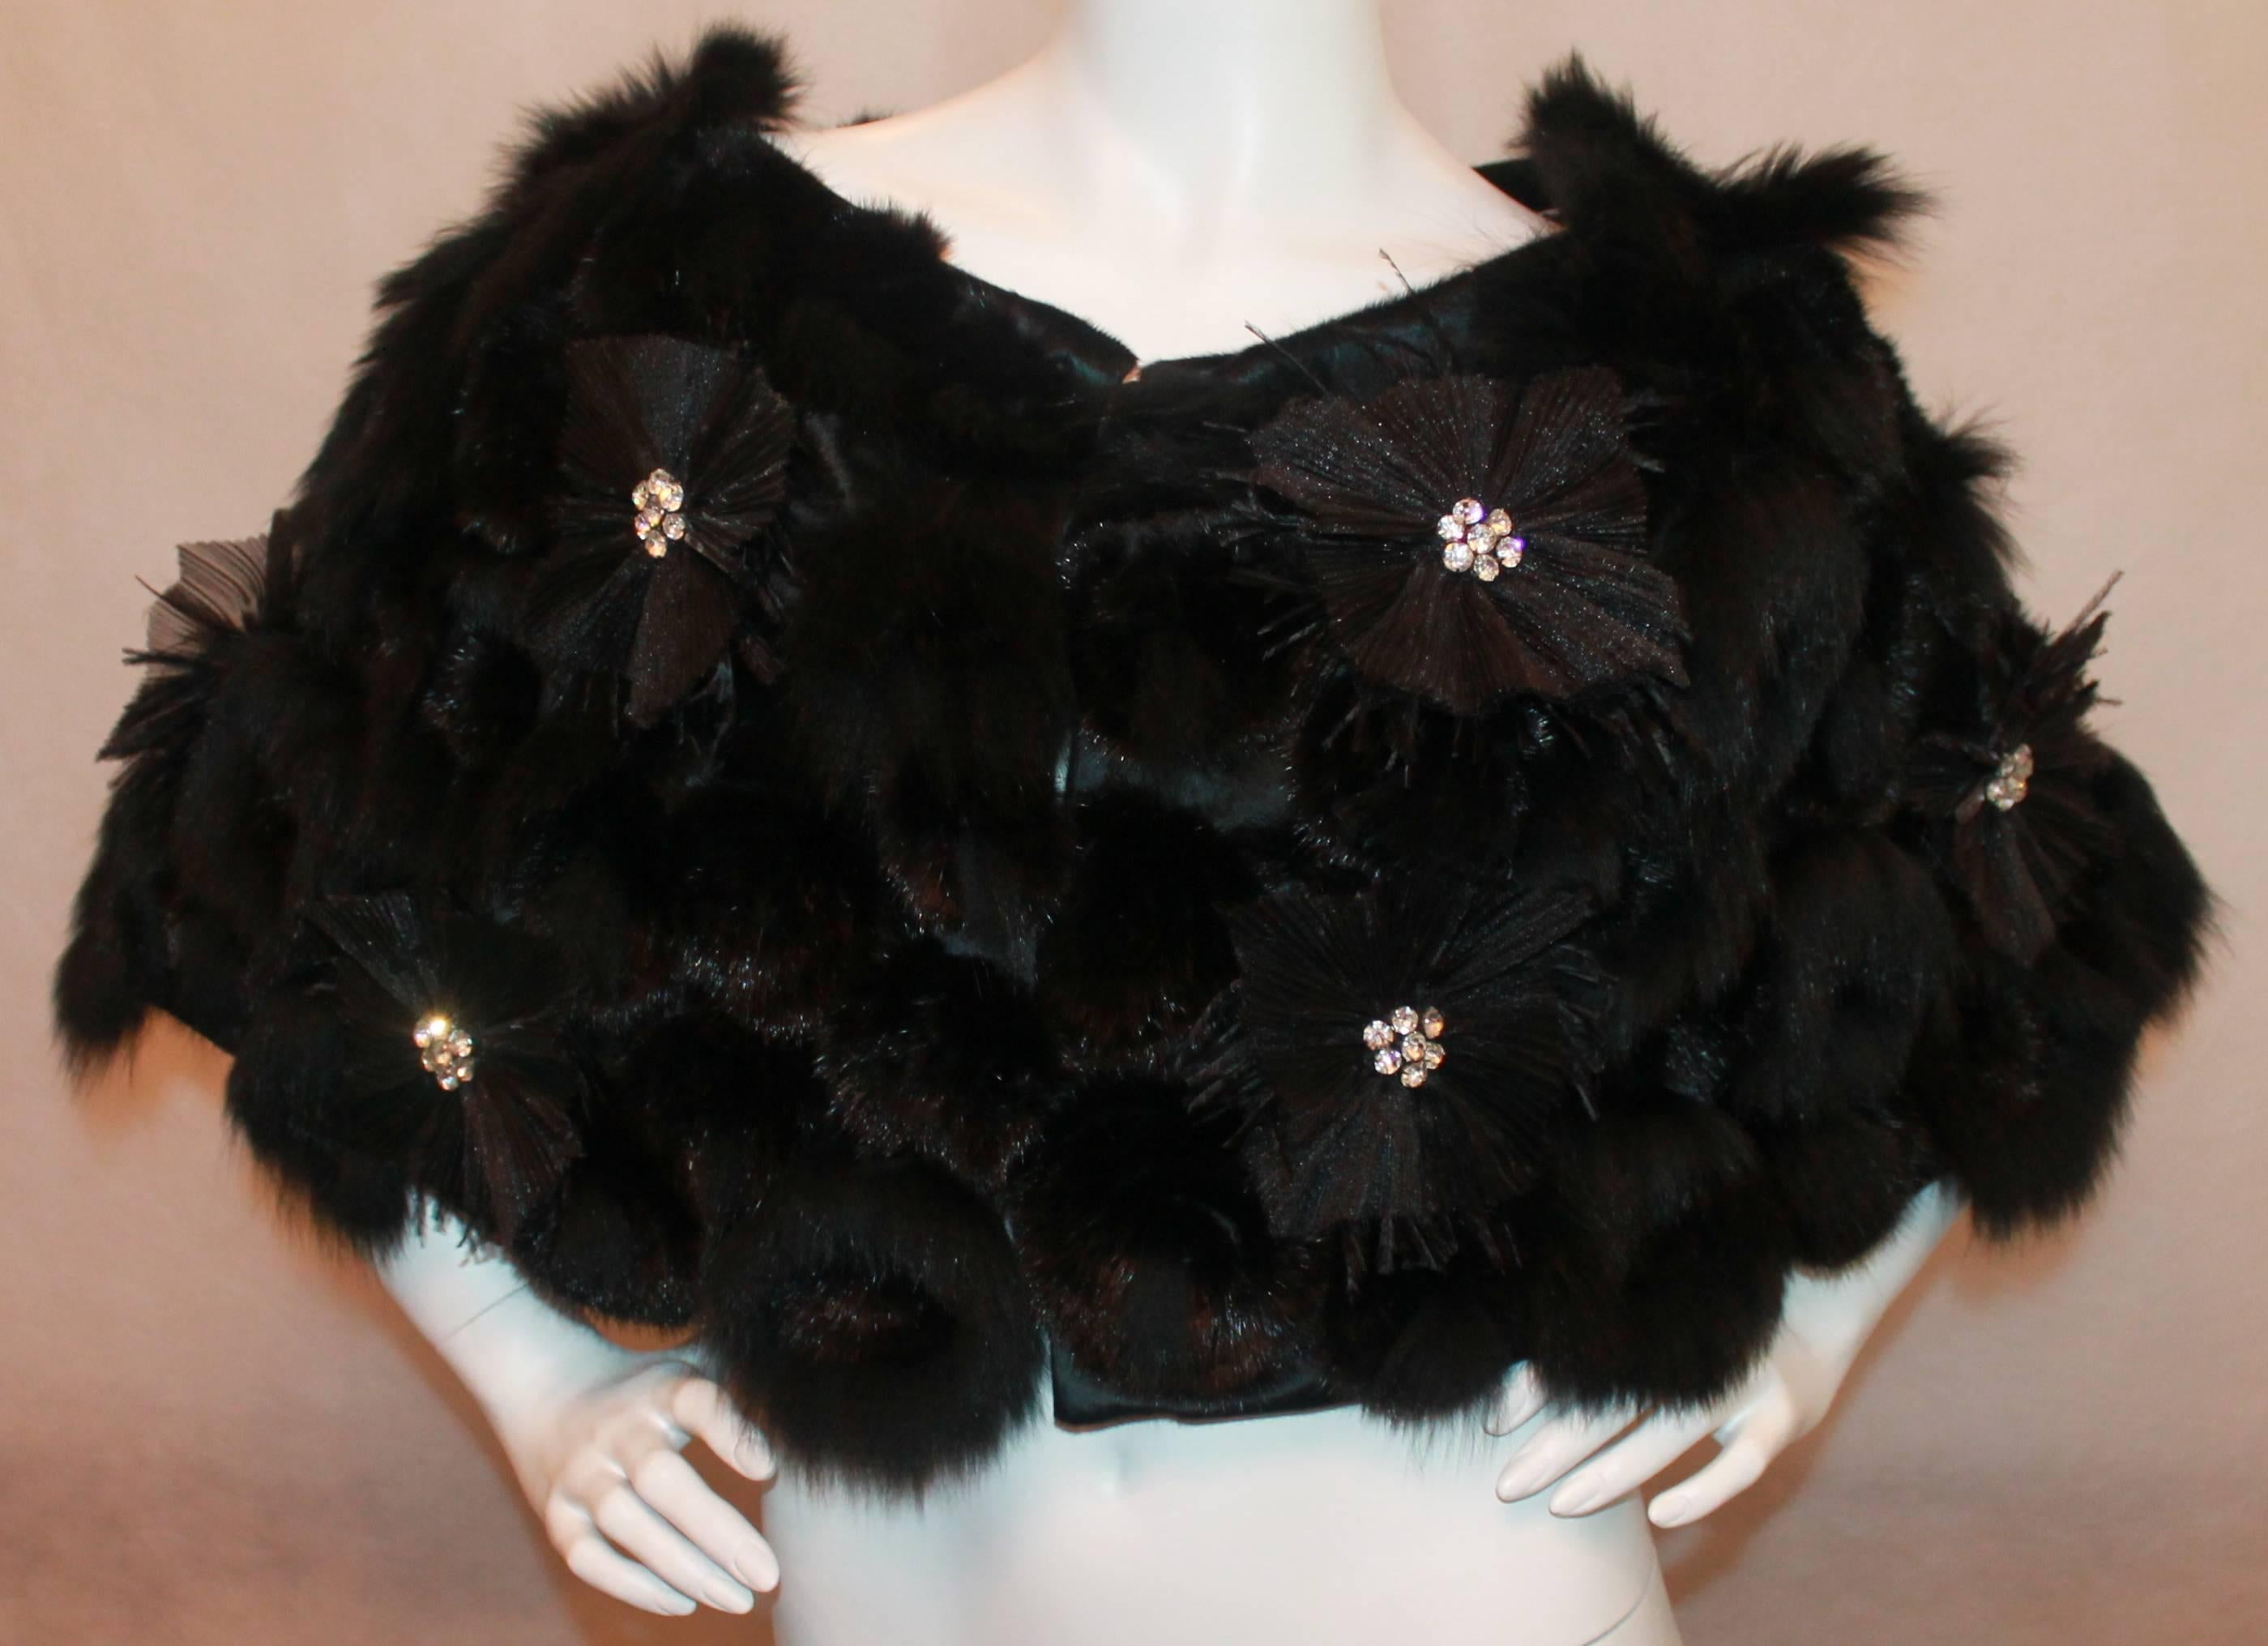 Prabal Gurung Black Mink & Fox floral pattern caplet with Rhinestone detail-M
Inside is fully lined in silk. 3 hook closures in front so it can be worn somewhat open or fully closed. This item is in excellent condition.

Measurements:
Length